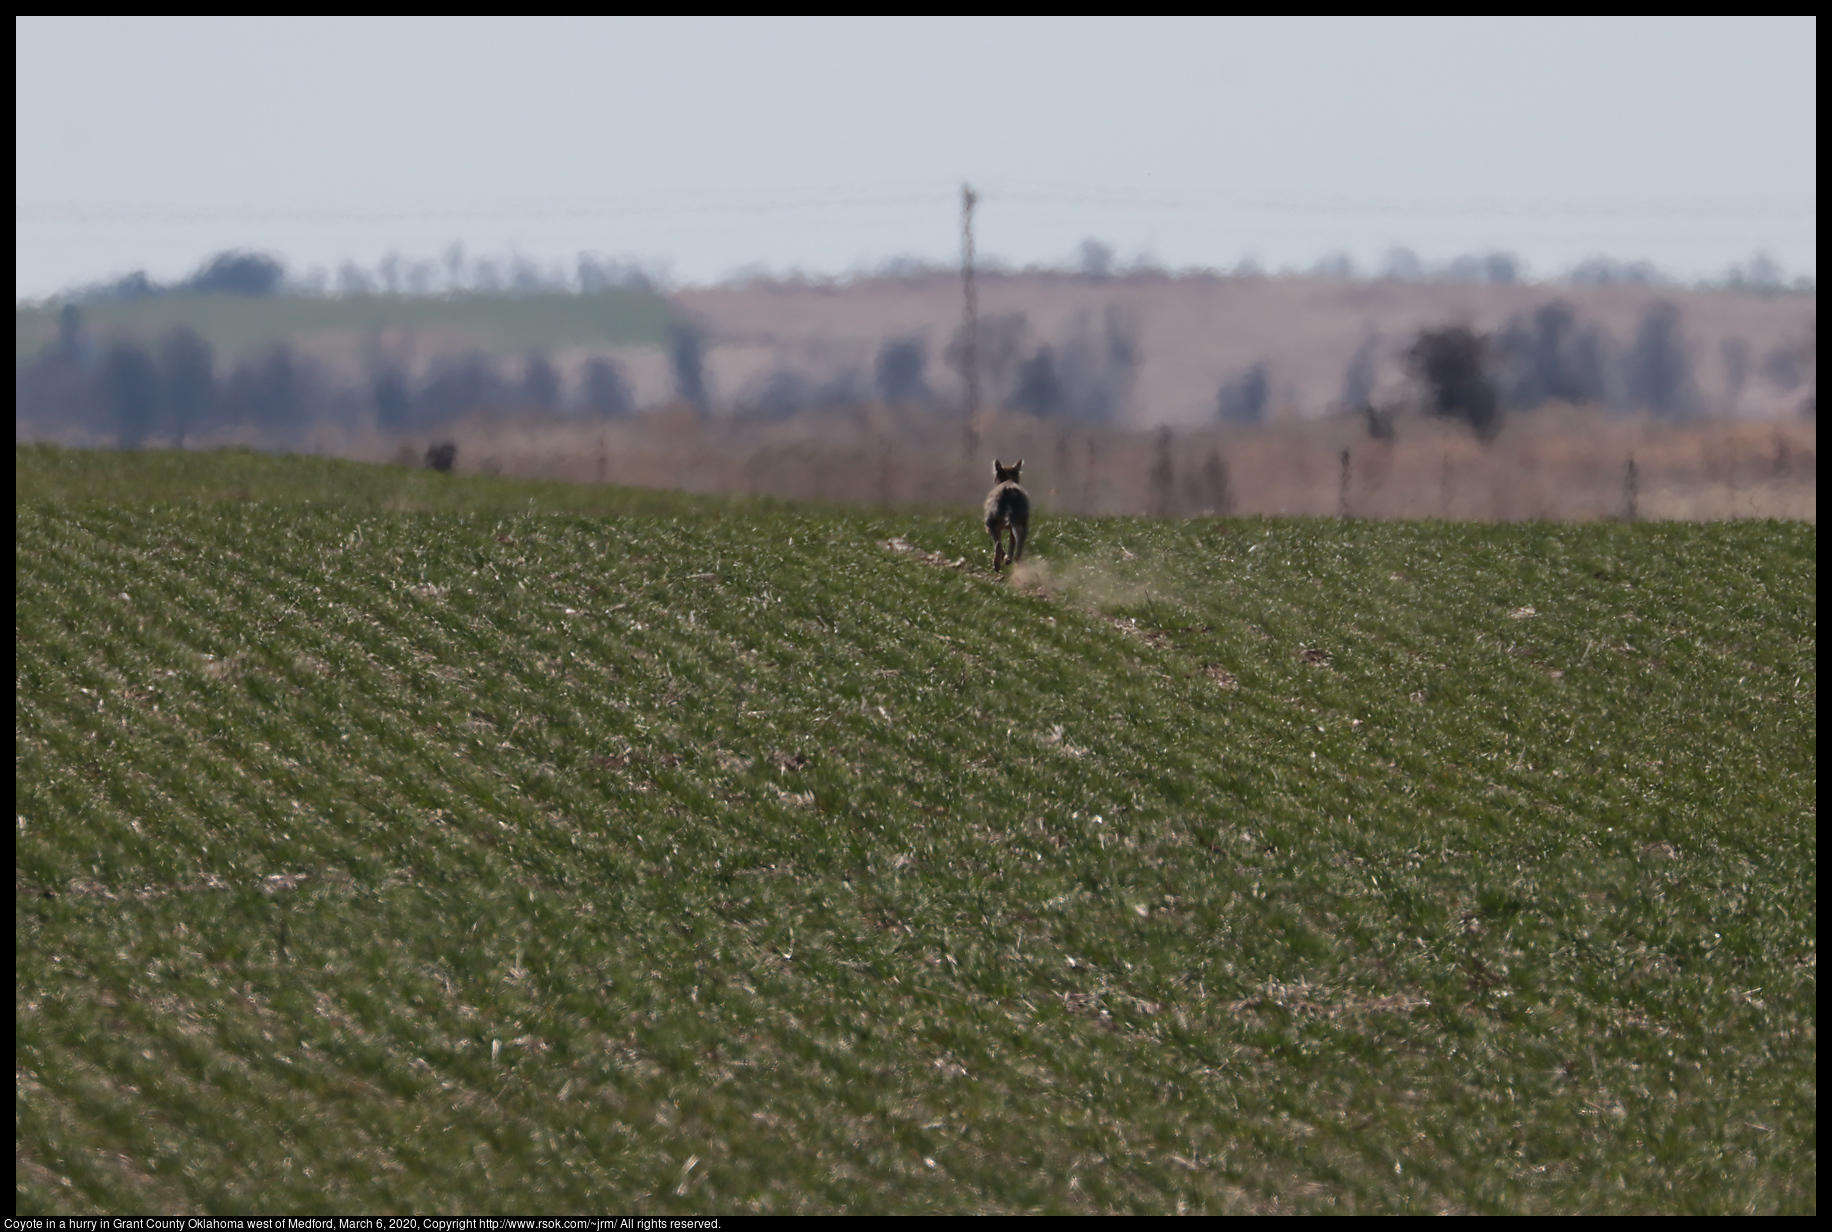 Coyote in a hurry in Grant County Oklahoma west of Medford, March 6, 2020